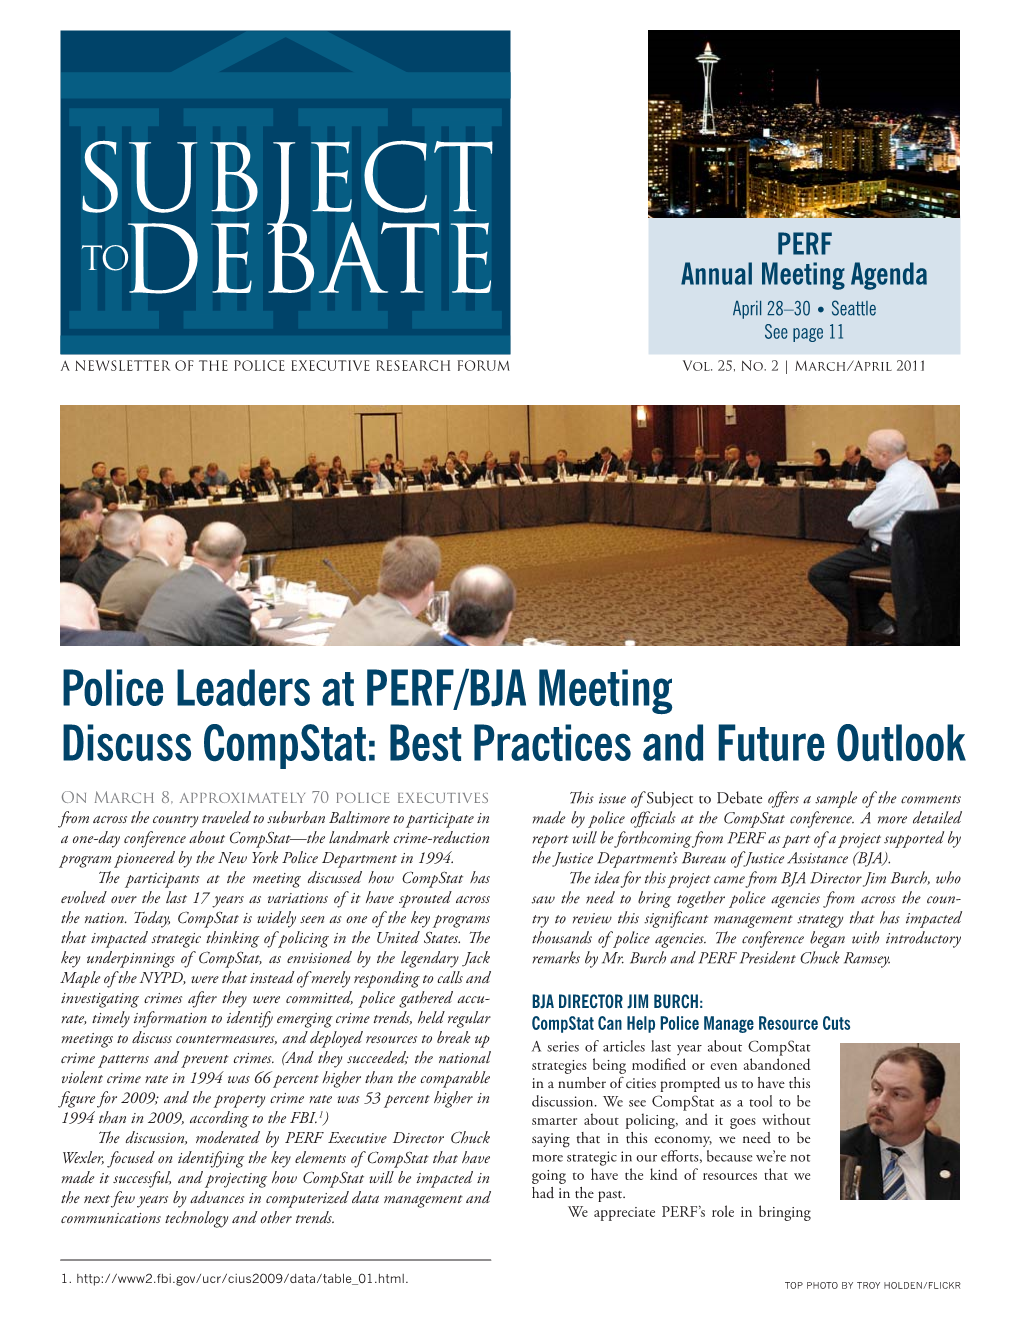 Police Leaders at PERF/BJA Meeting Discuss Compstat: Best Practices and Future Outlook